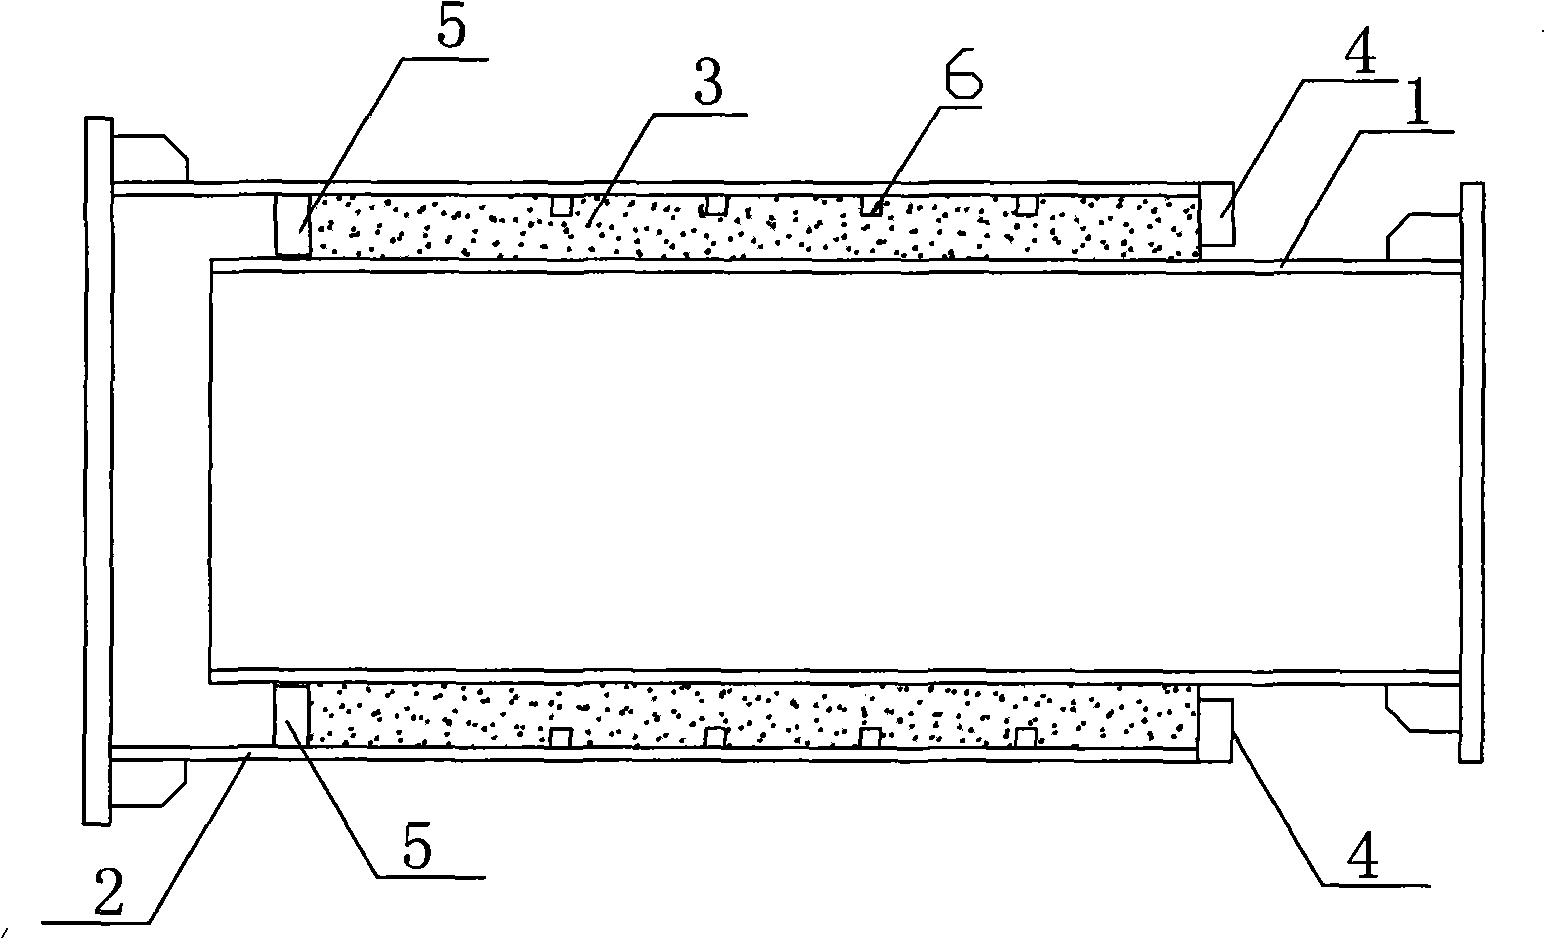 Sleeve dissipative element with shear key